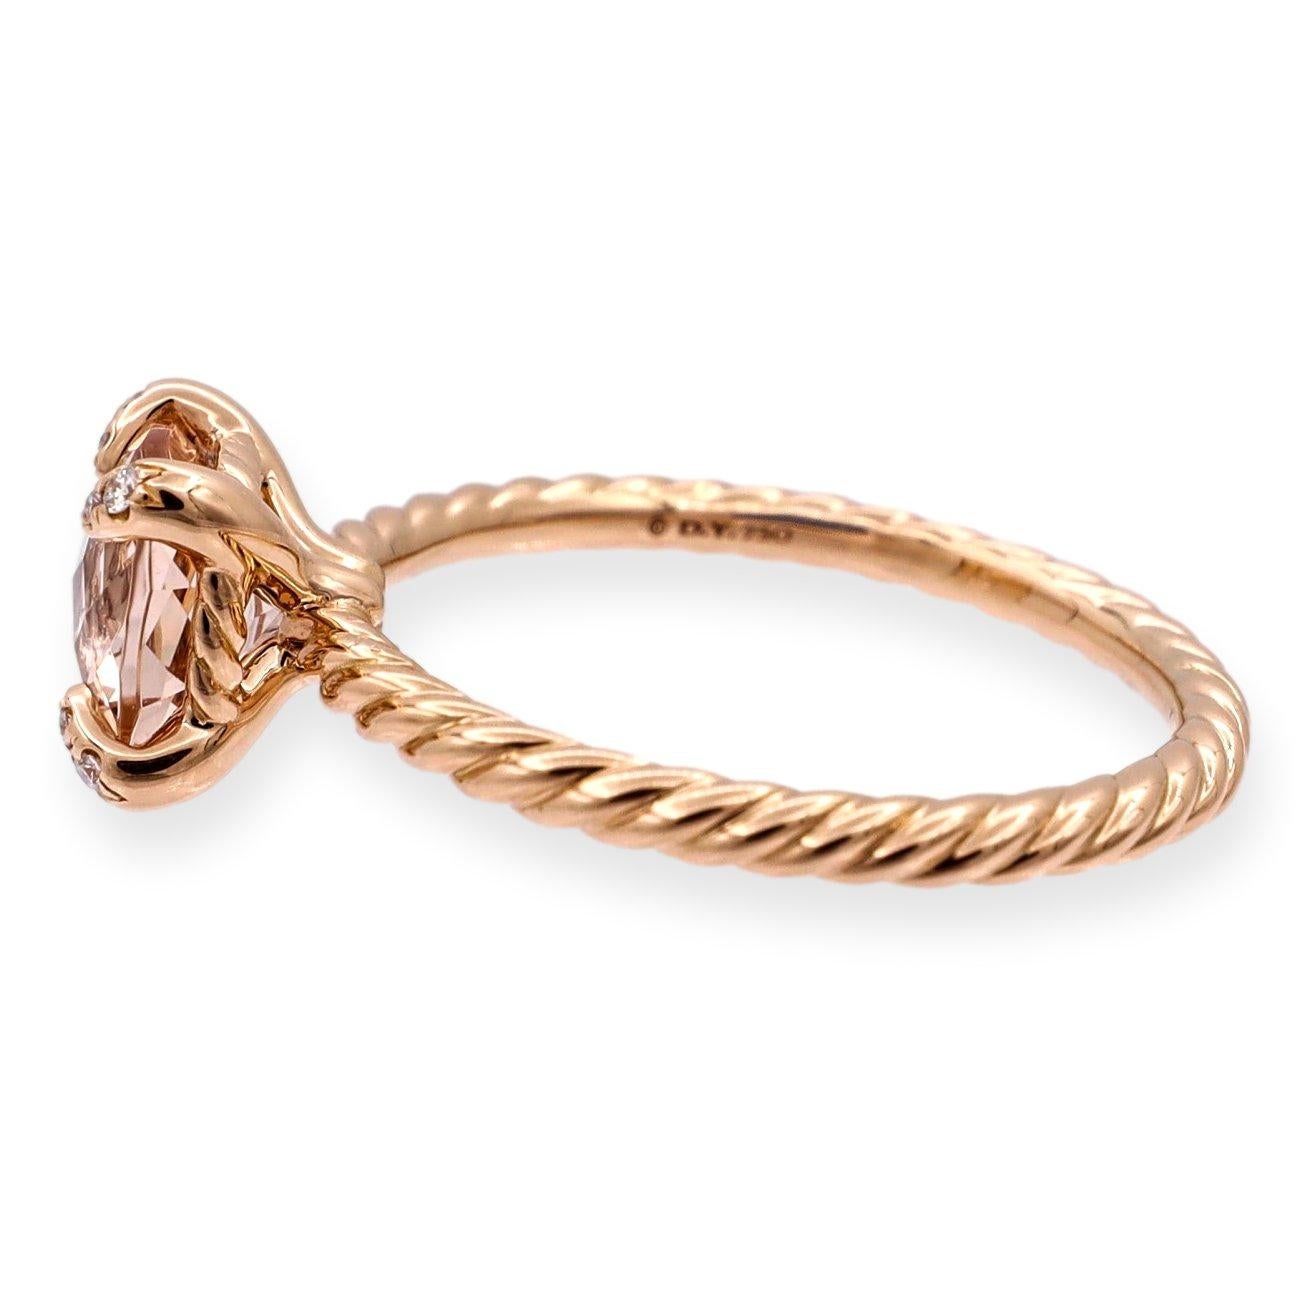 Introducing the captivating David Yurman Chatelaine Collection Ring – a testament to elegance and artistry. Crafted in 18k rose gold, this ring showcases a luminous cushion-cut morganite, weighing 1.50 carats, at its center. The morganite's beauty